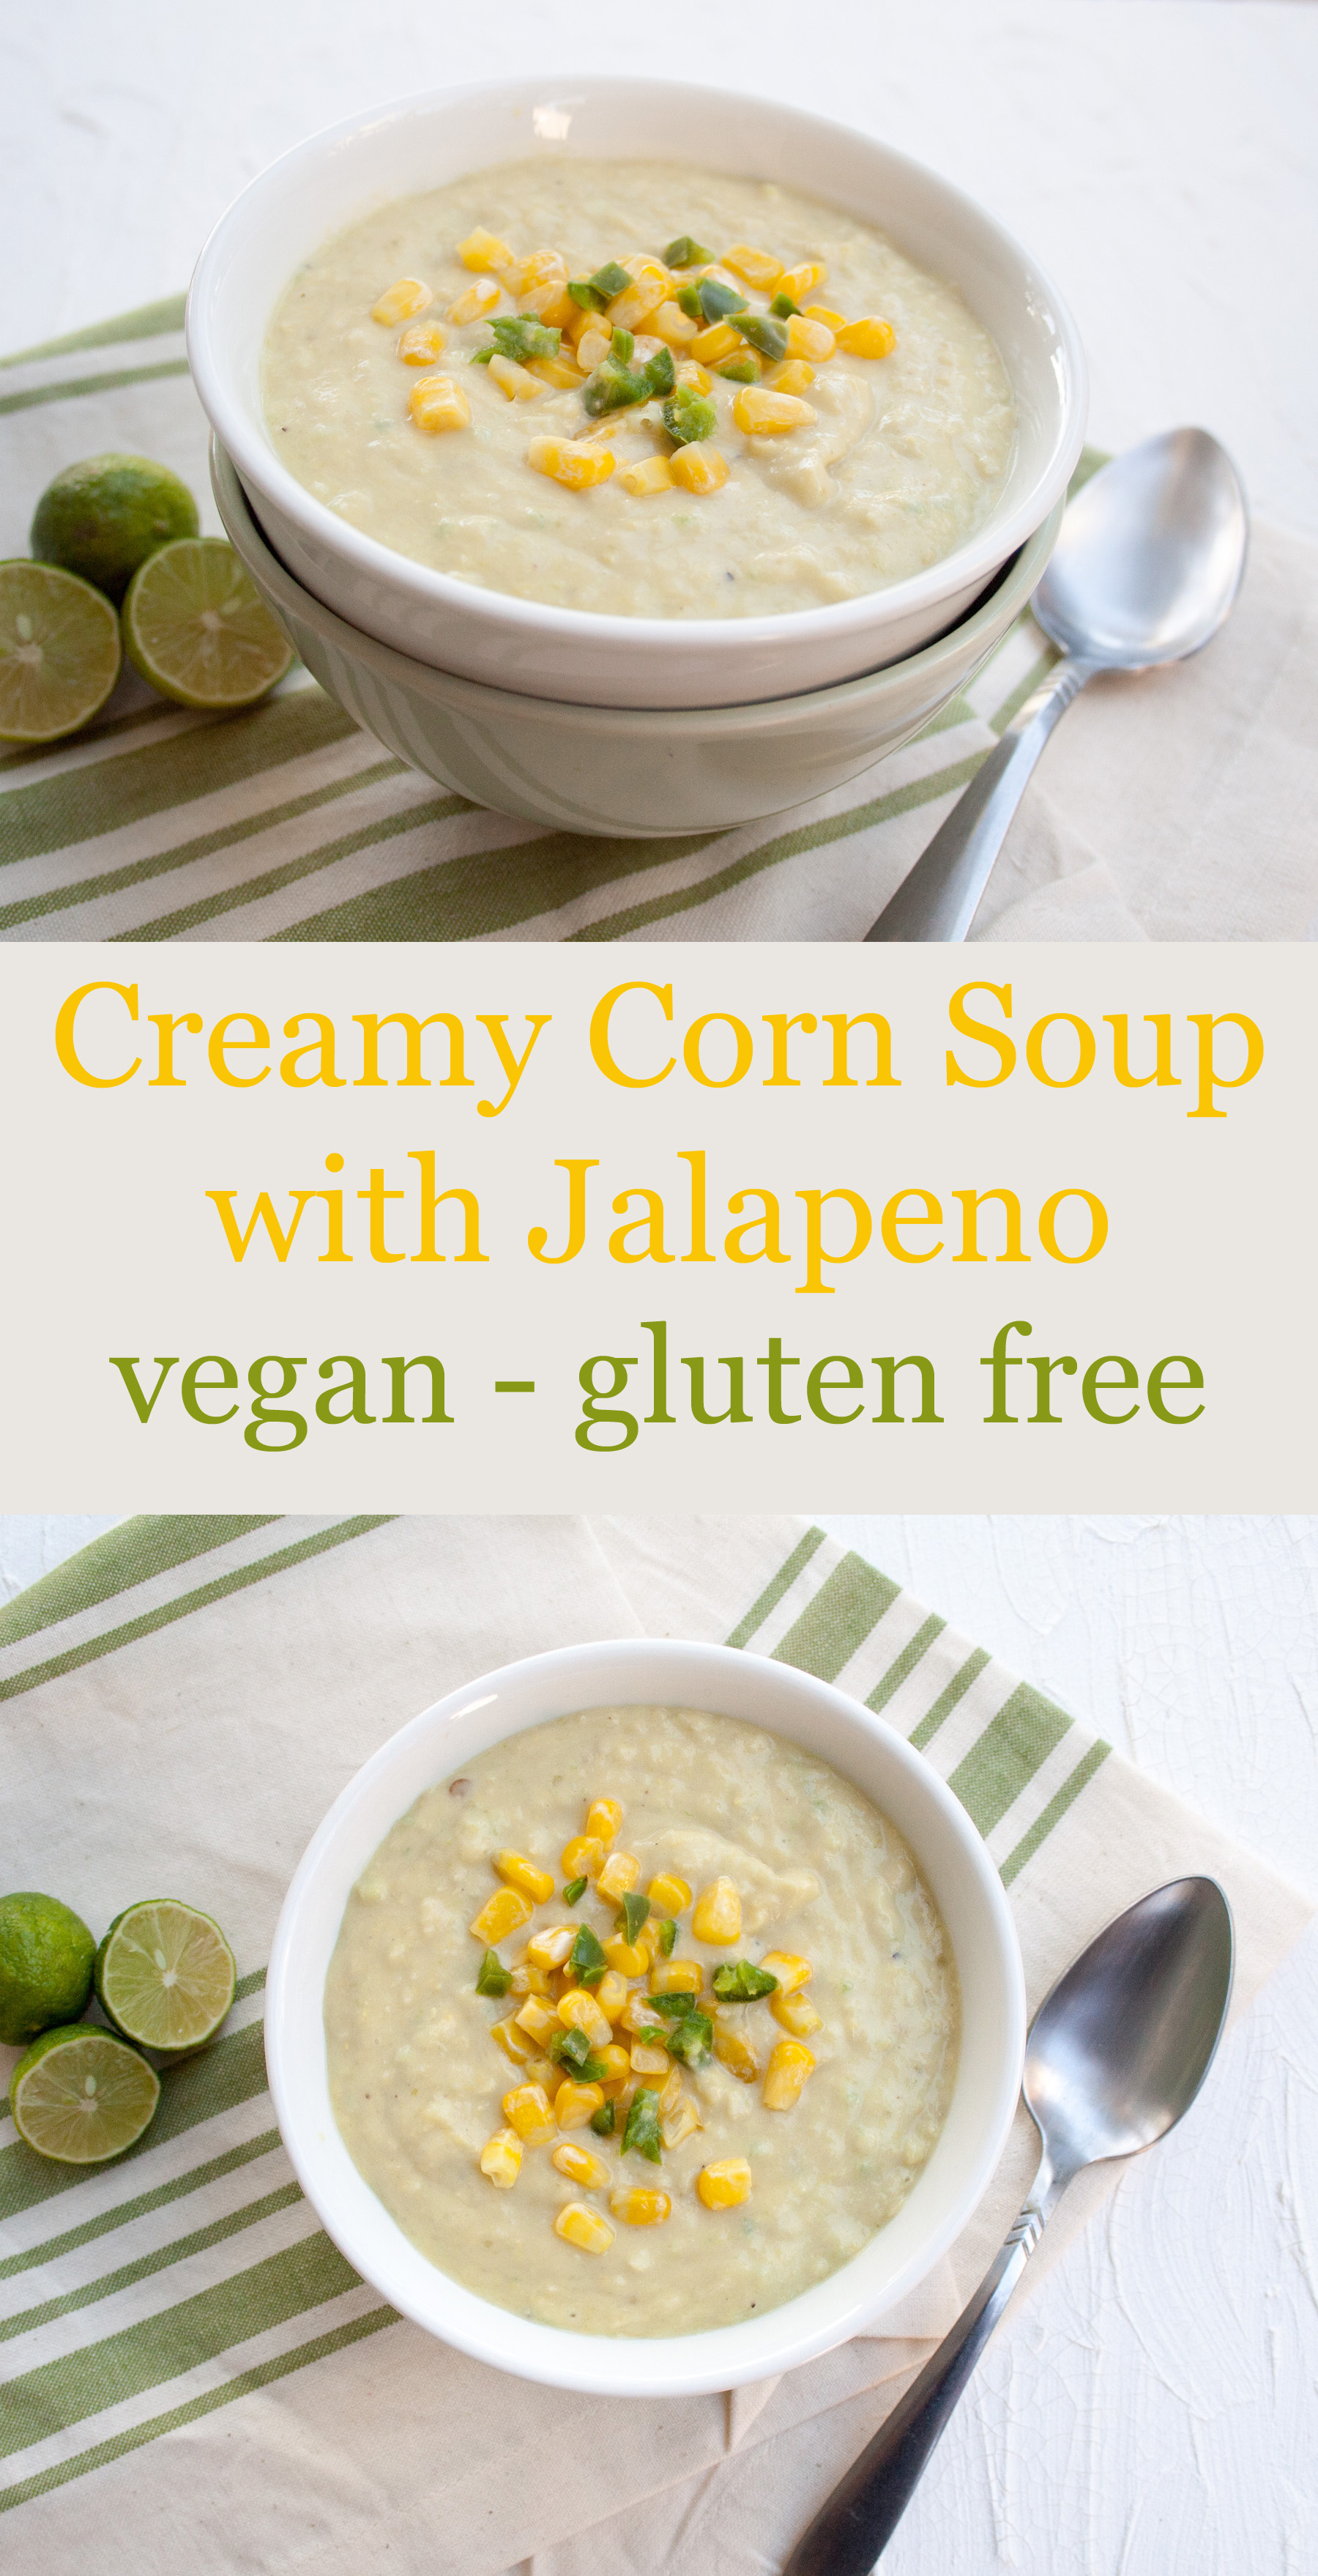 Creamy Corn Soup with Jalapeño collage photo with text.